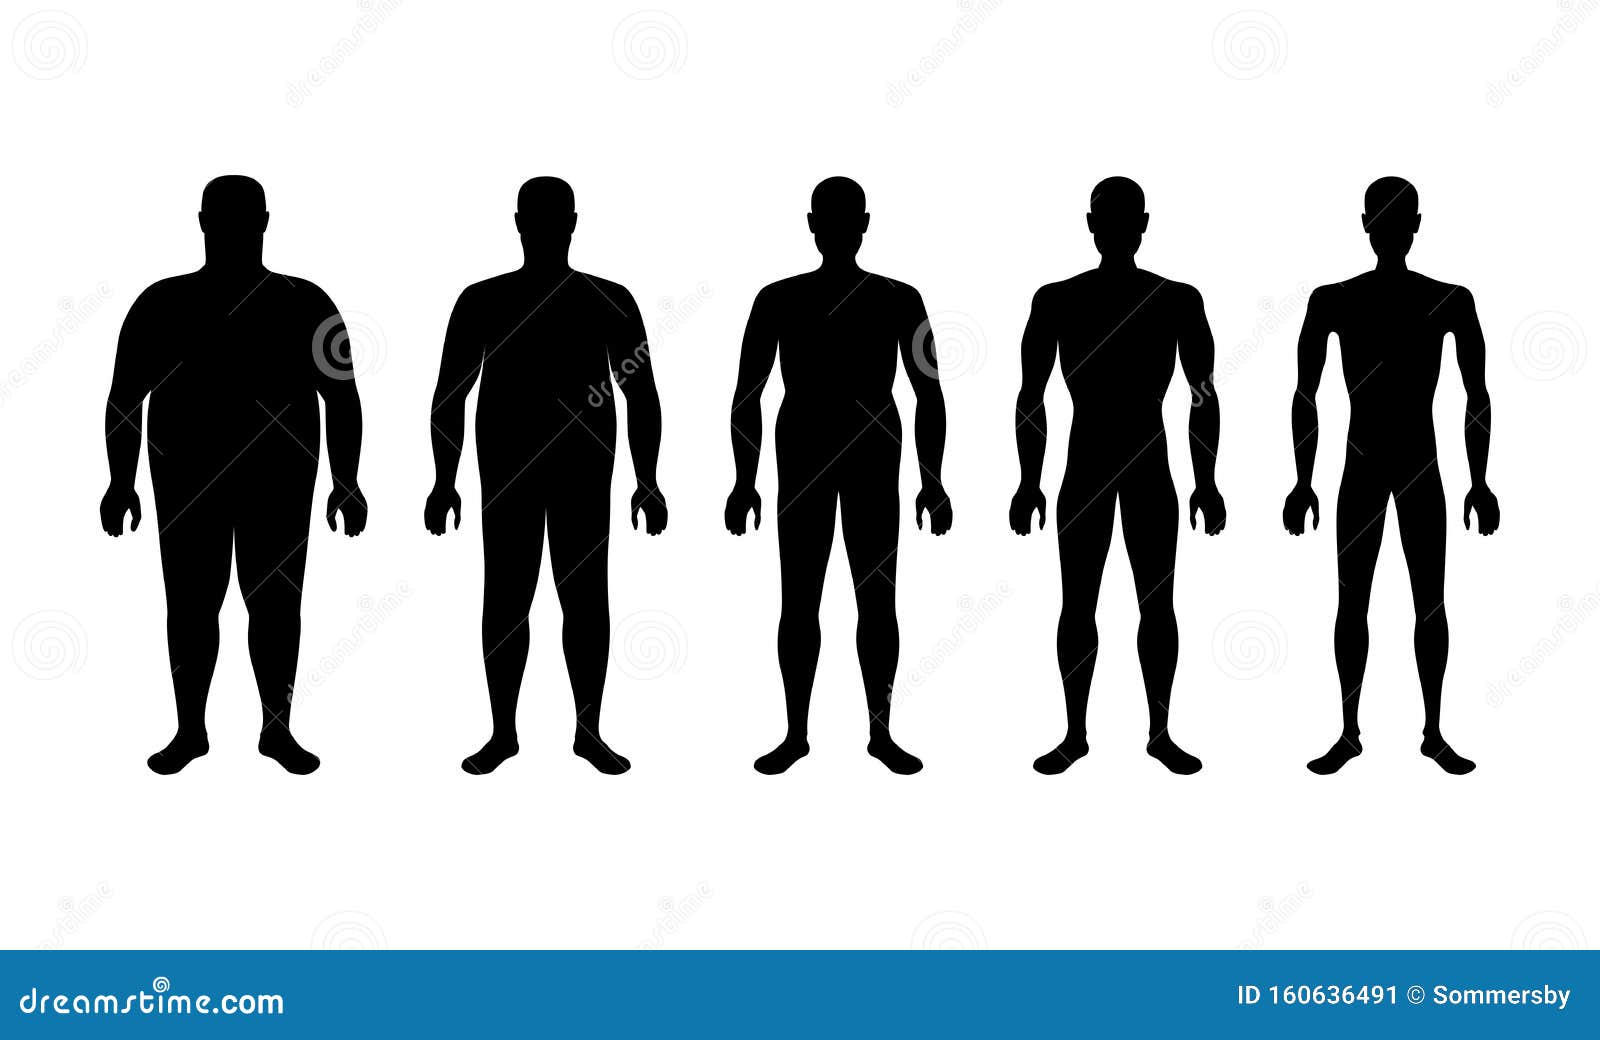 characterizing male silhouettes for different stages of body mass index